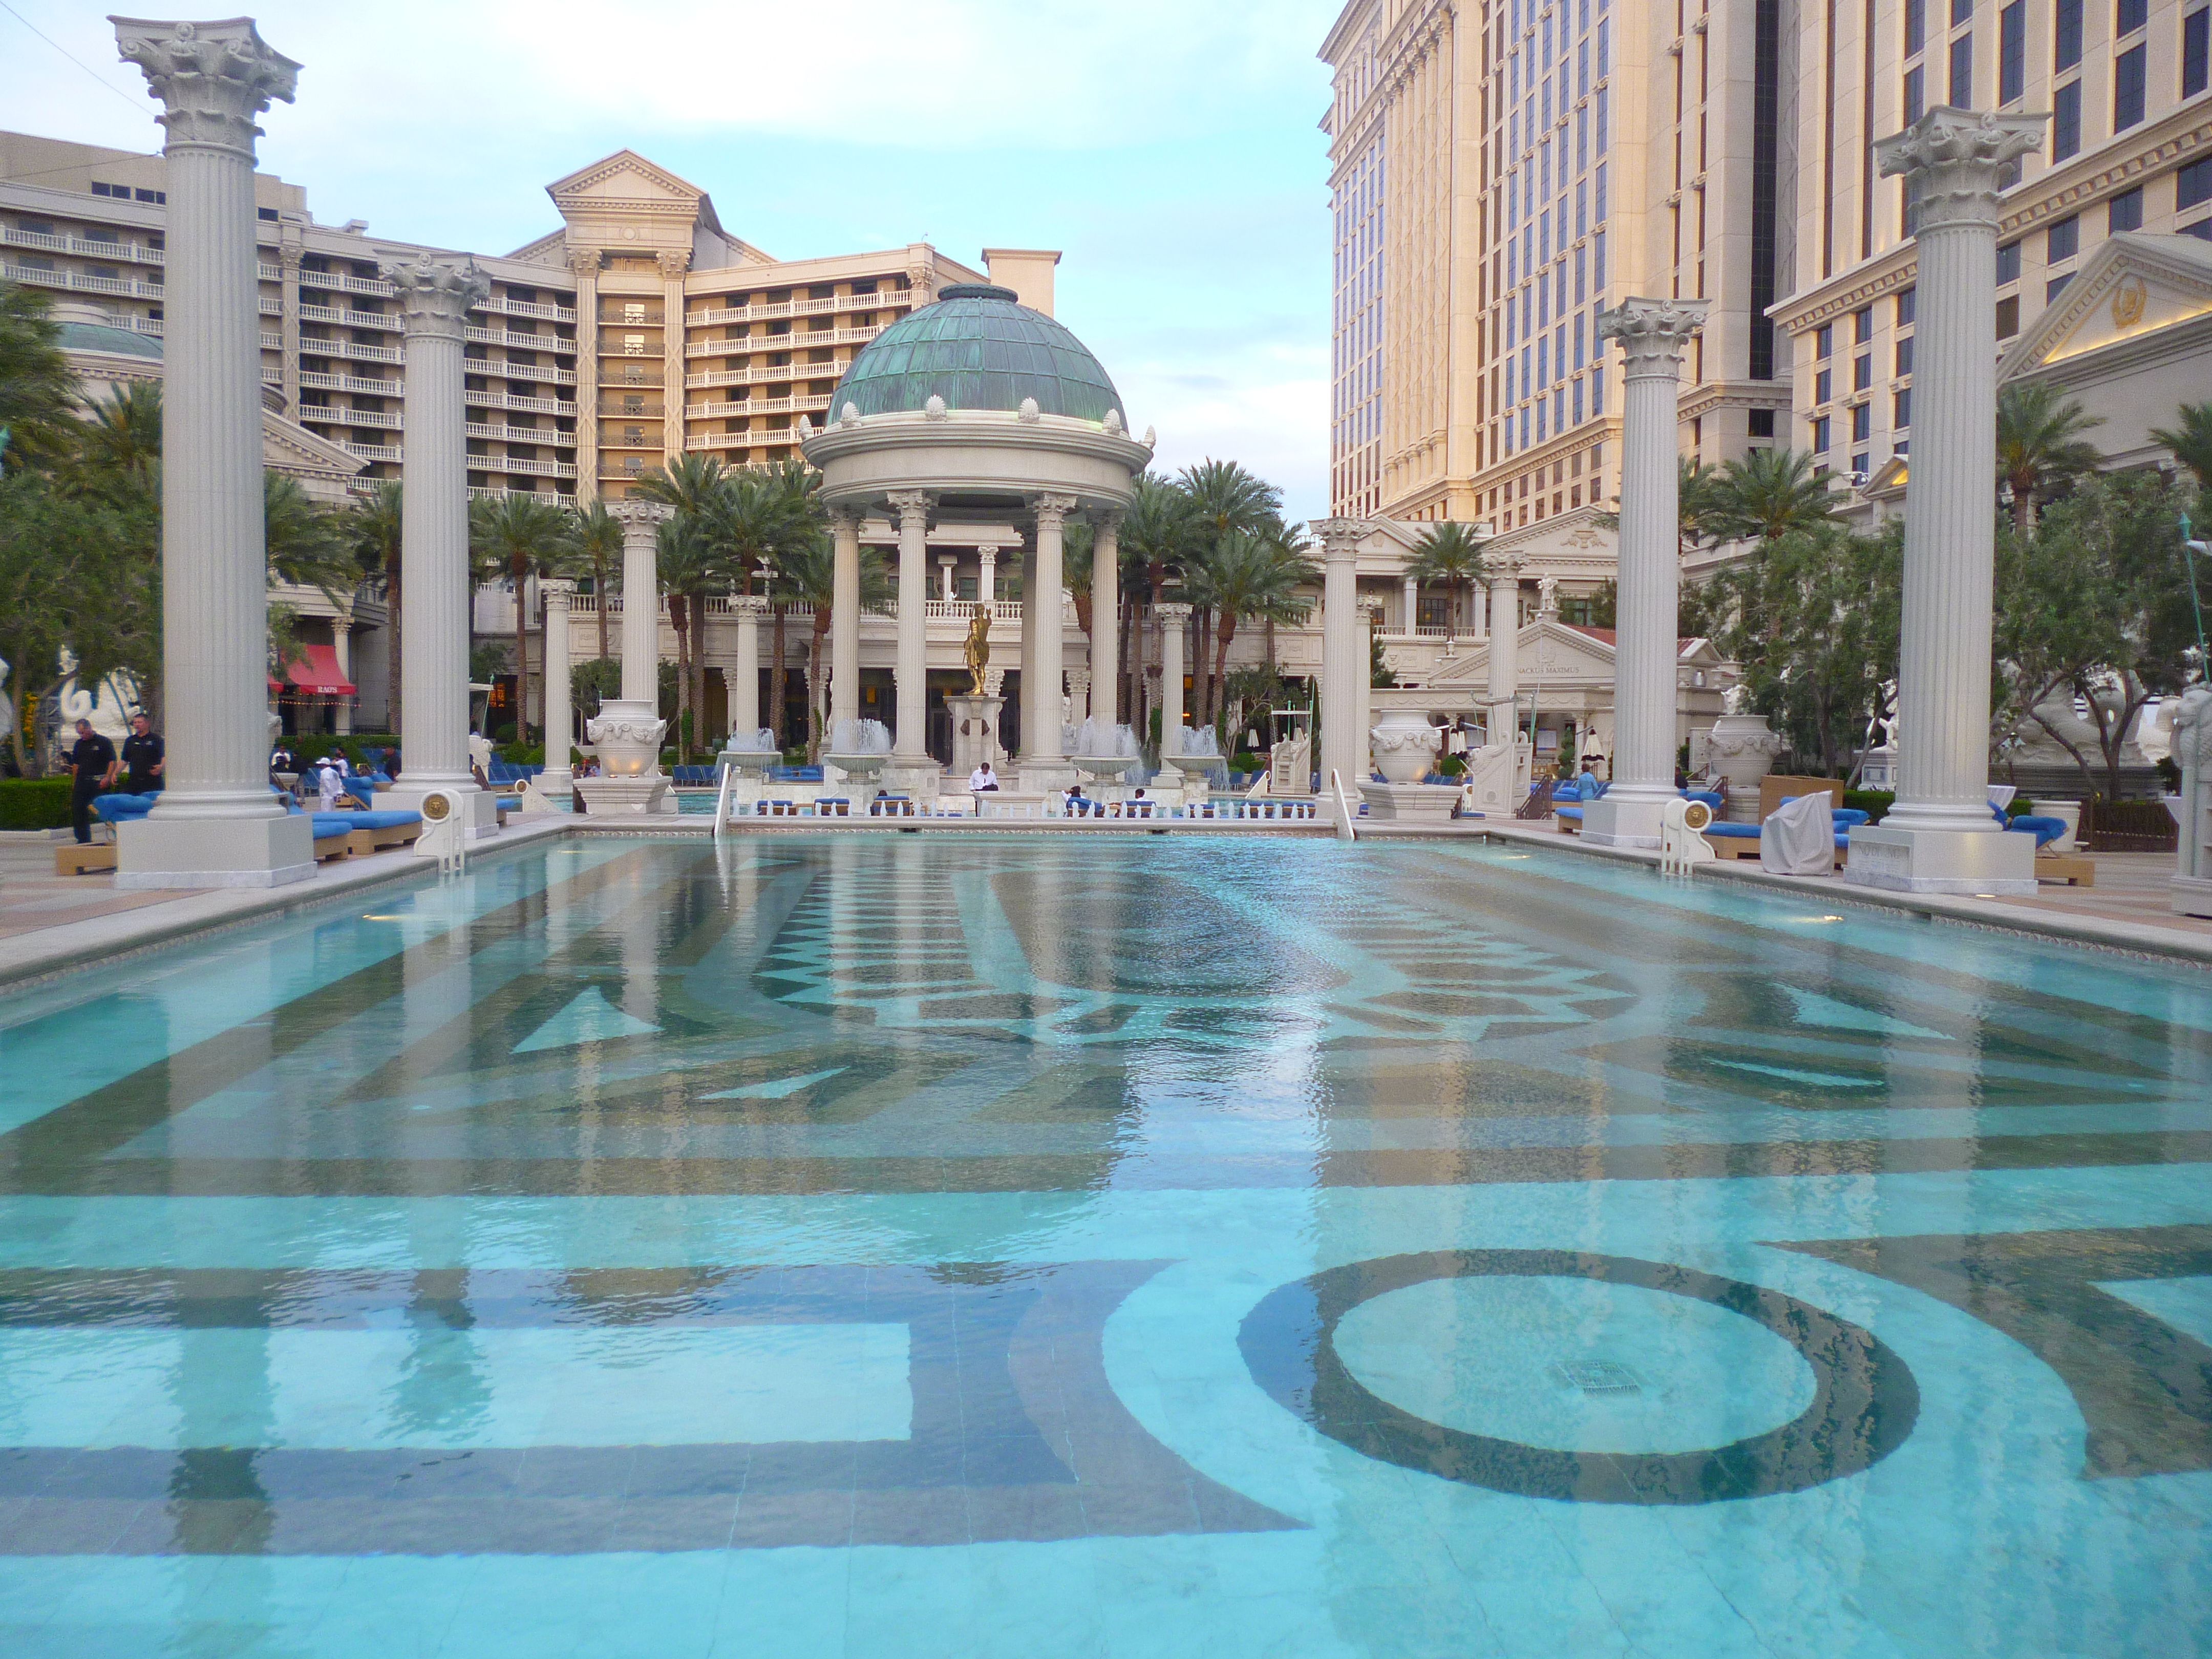 Garden of the Gods: Caesars Palace's New Multitier Pool Complex